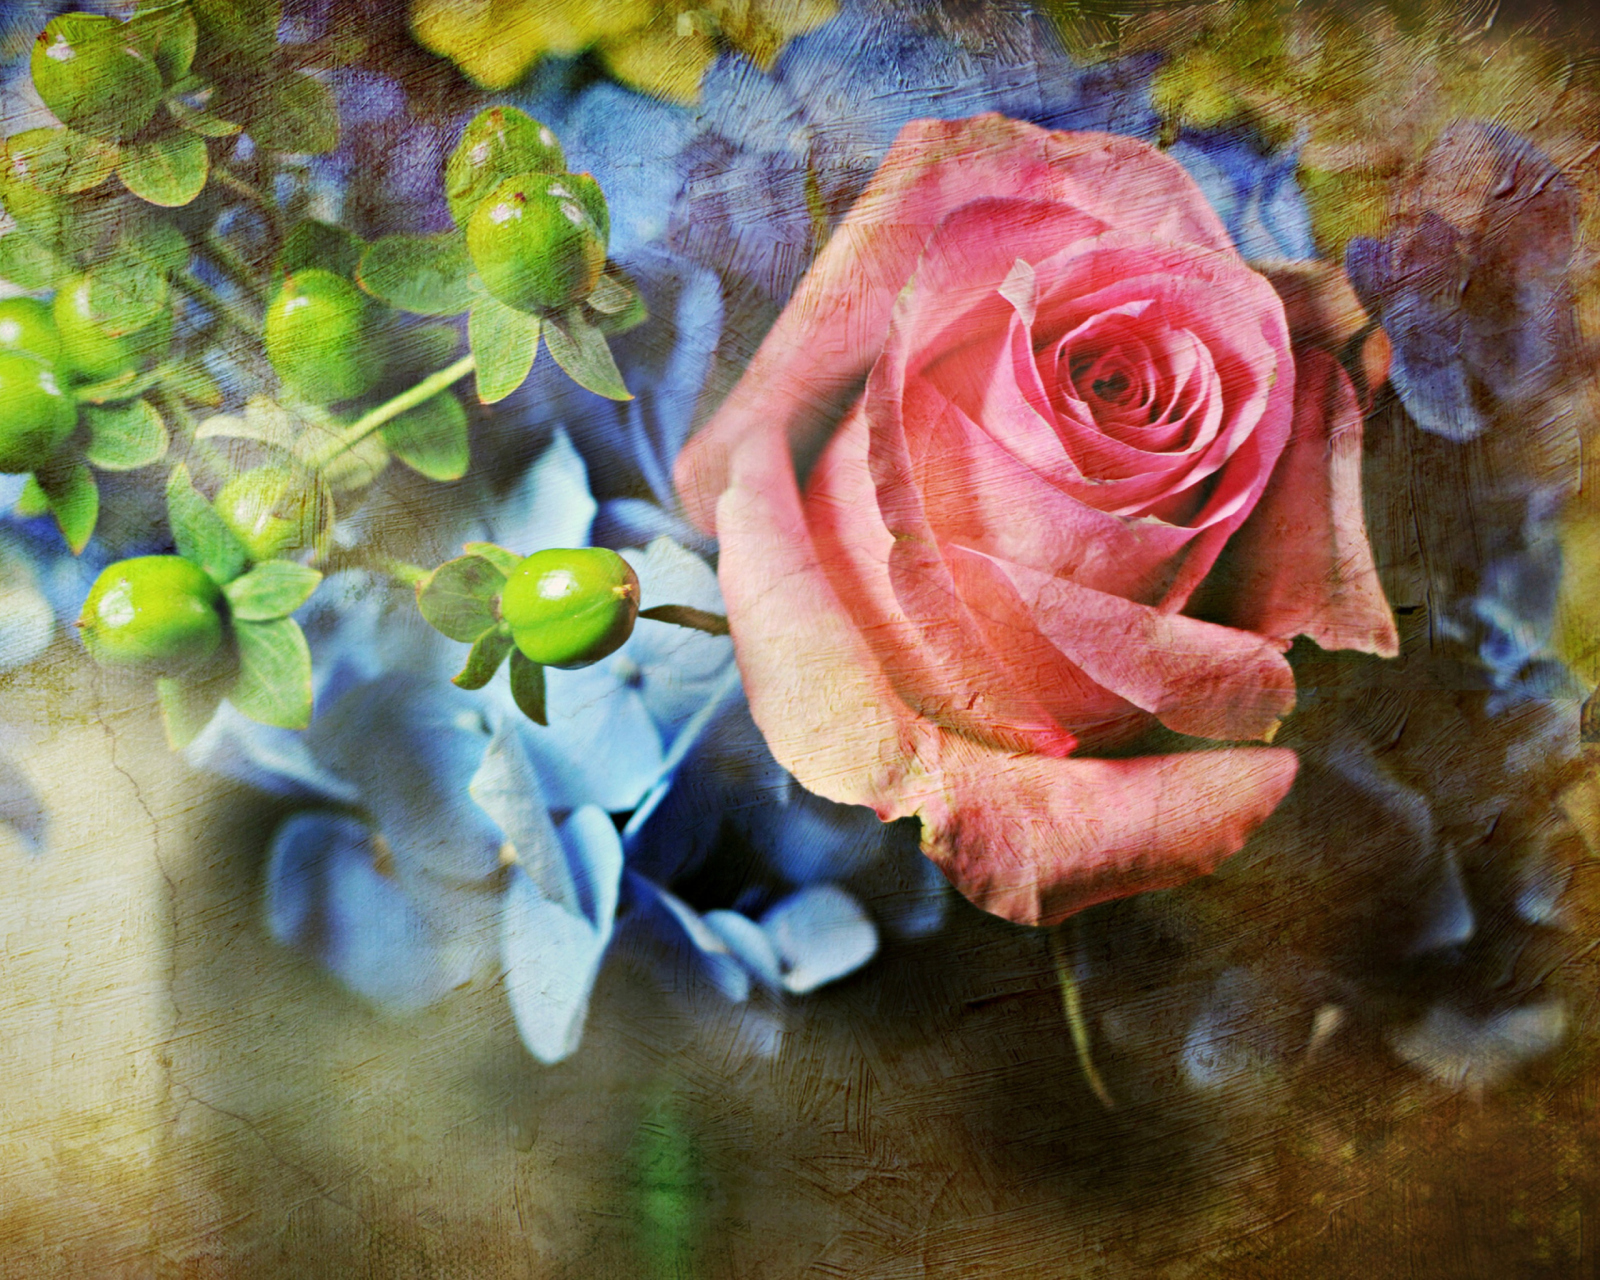 Pink Rose And Blue Flowers wallpaper 1600x1280